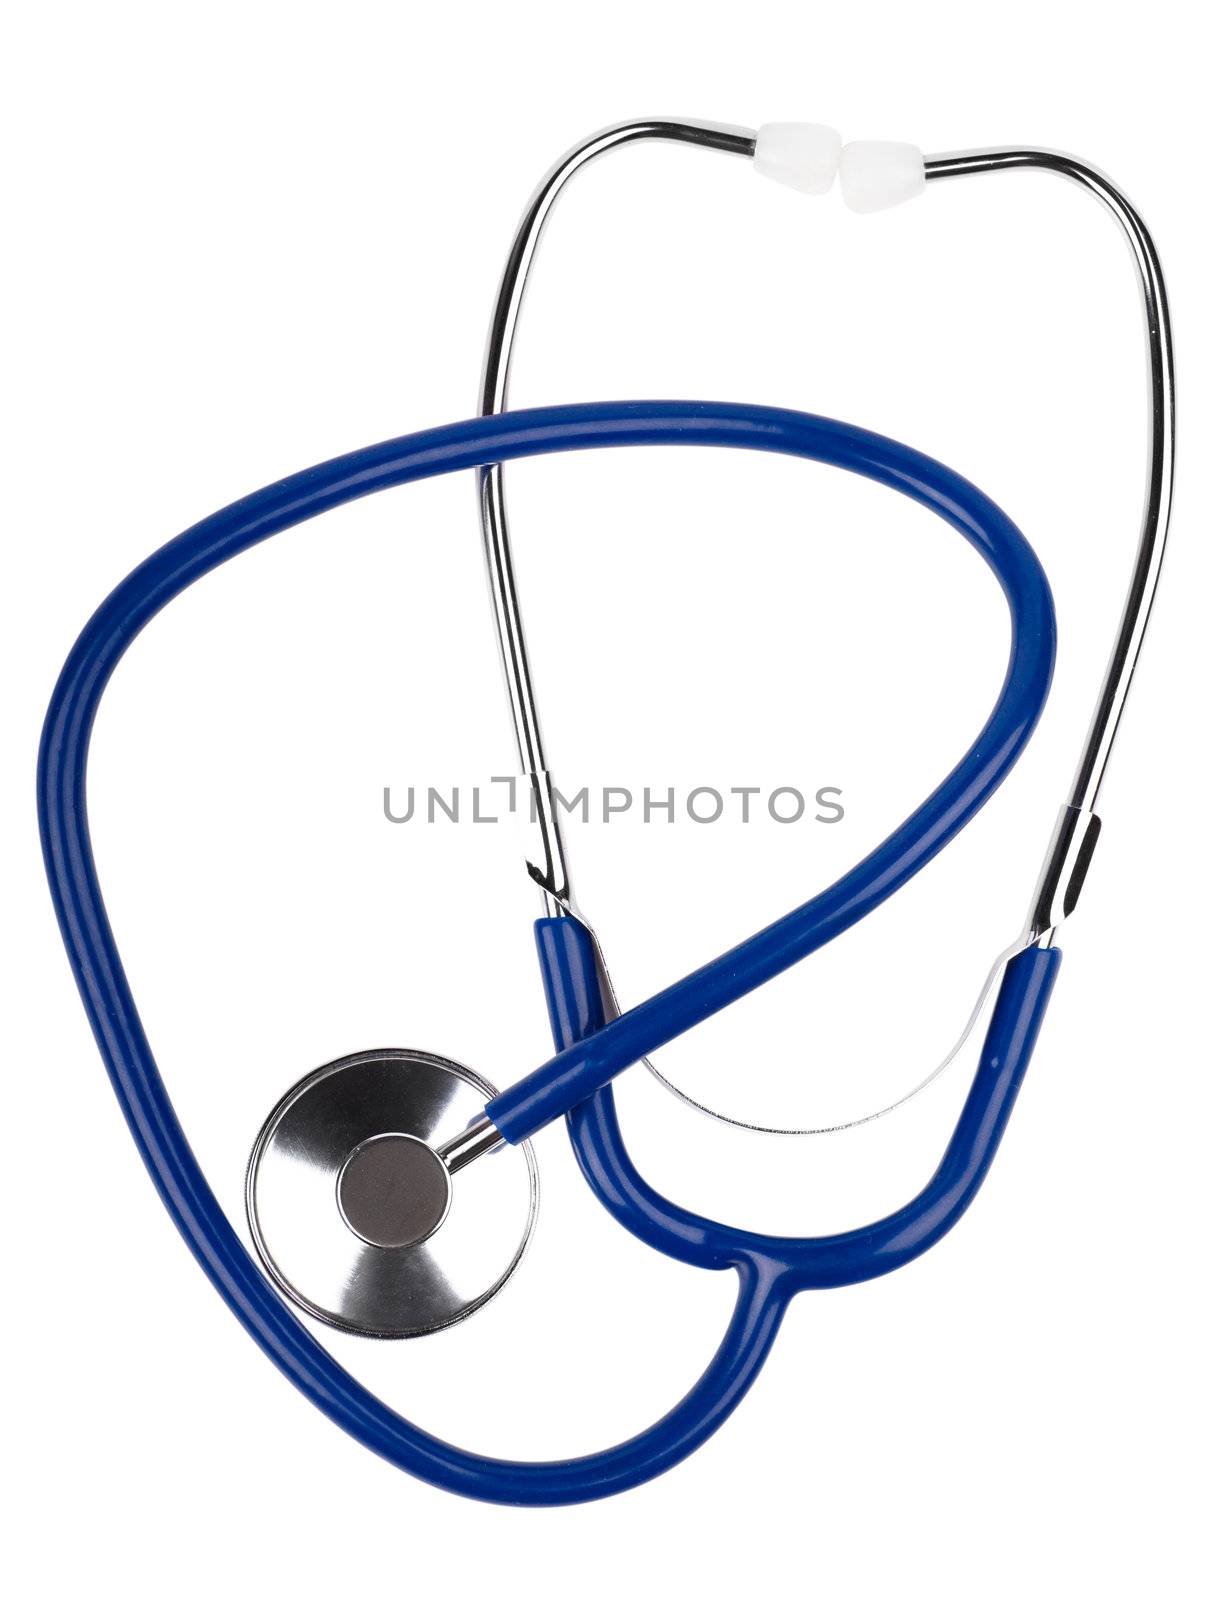 Closeup view of blue stethoscope isolated on the white background